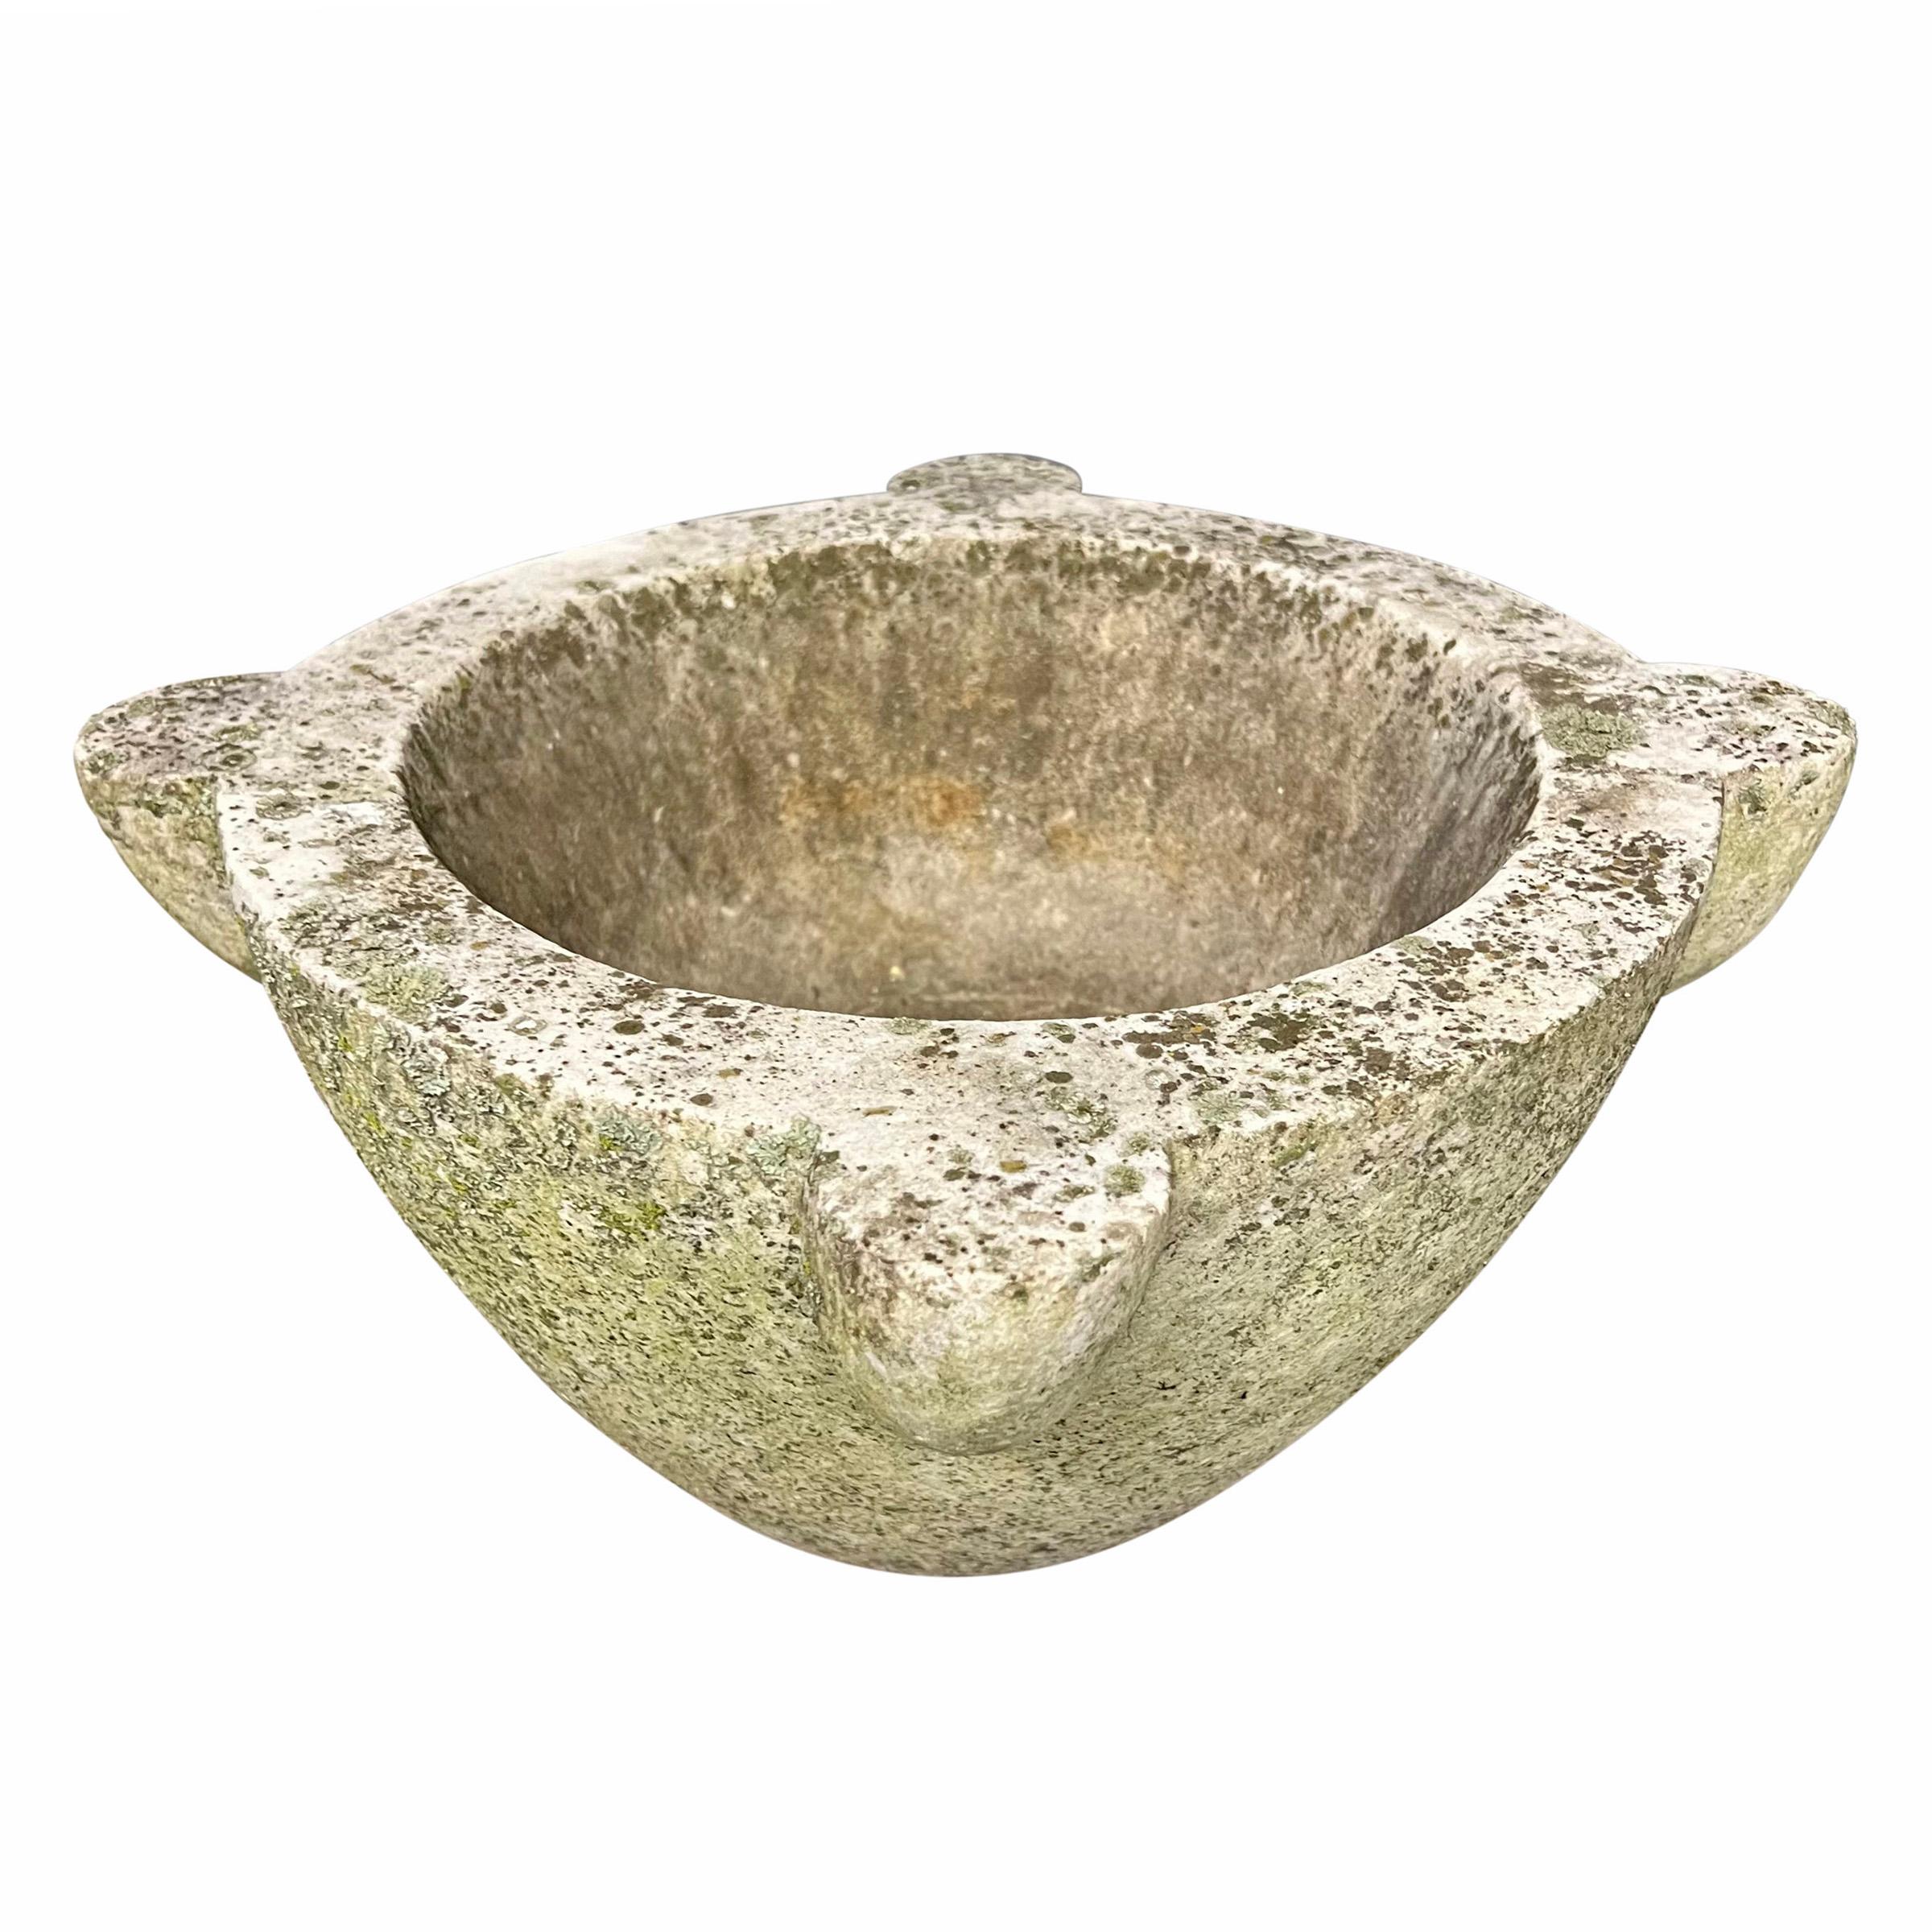 19th Century French Moss and Lichen Covered Marble Mortar For Sale 2